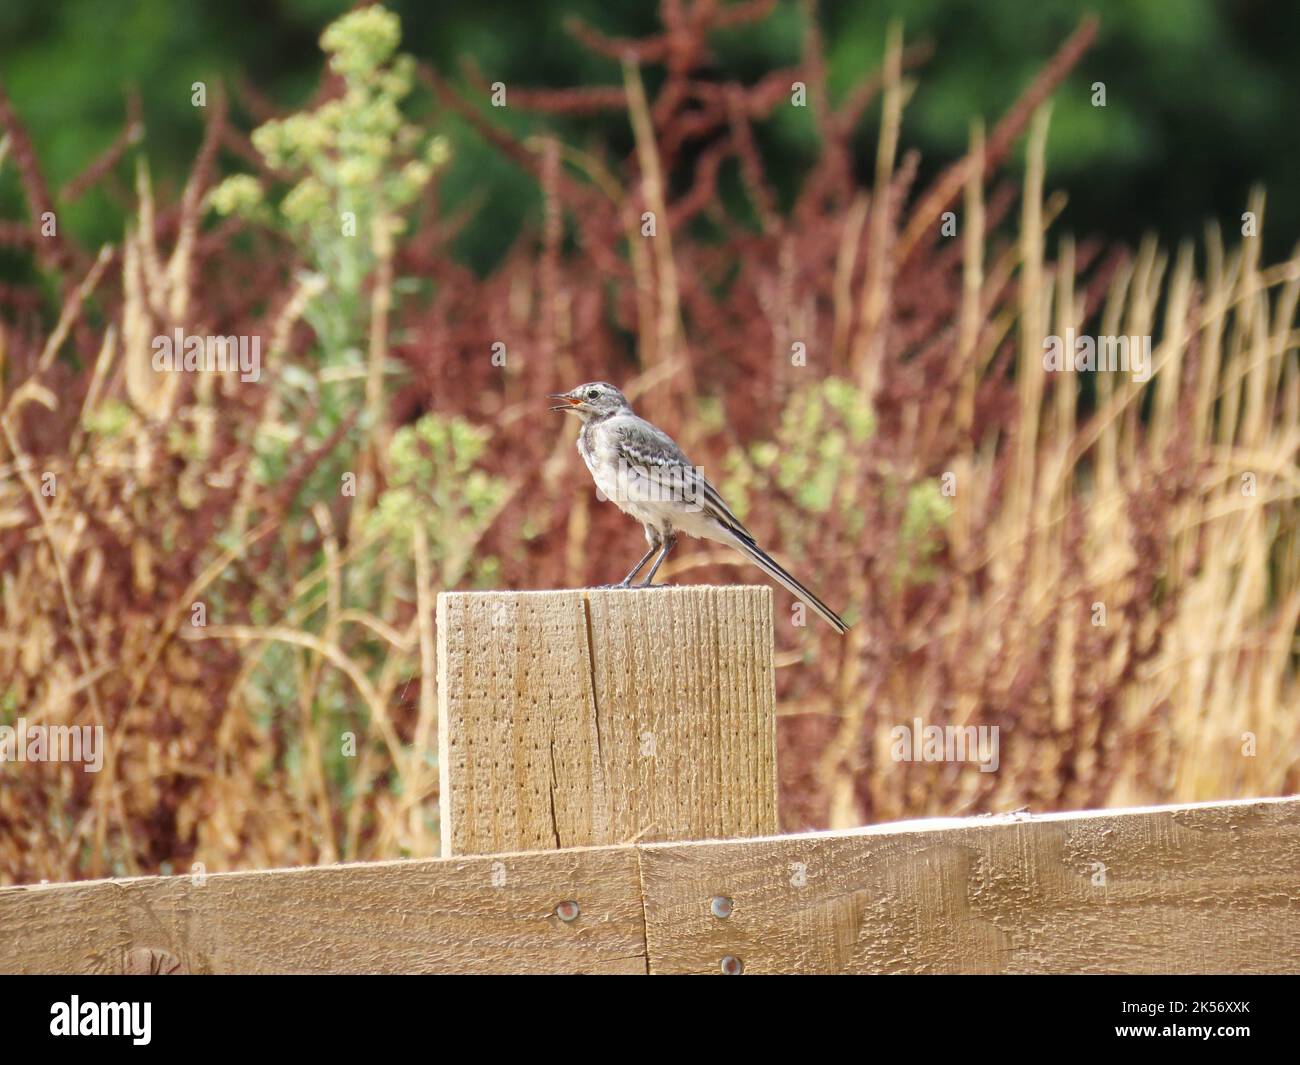 young wagtail perched on a fence singing with a blurred background Stock Photo